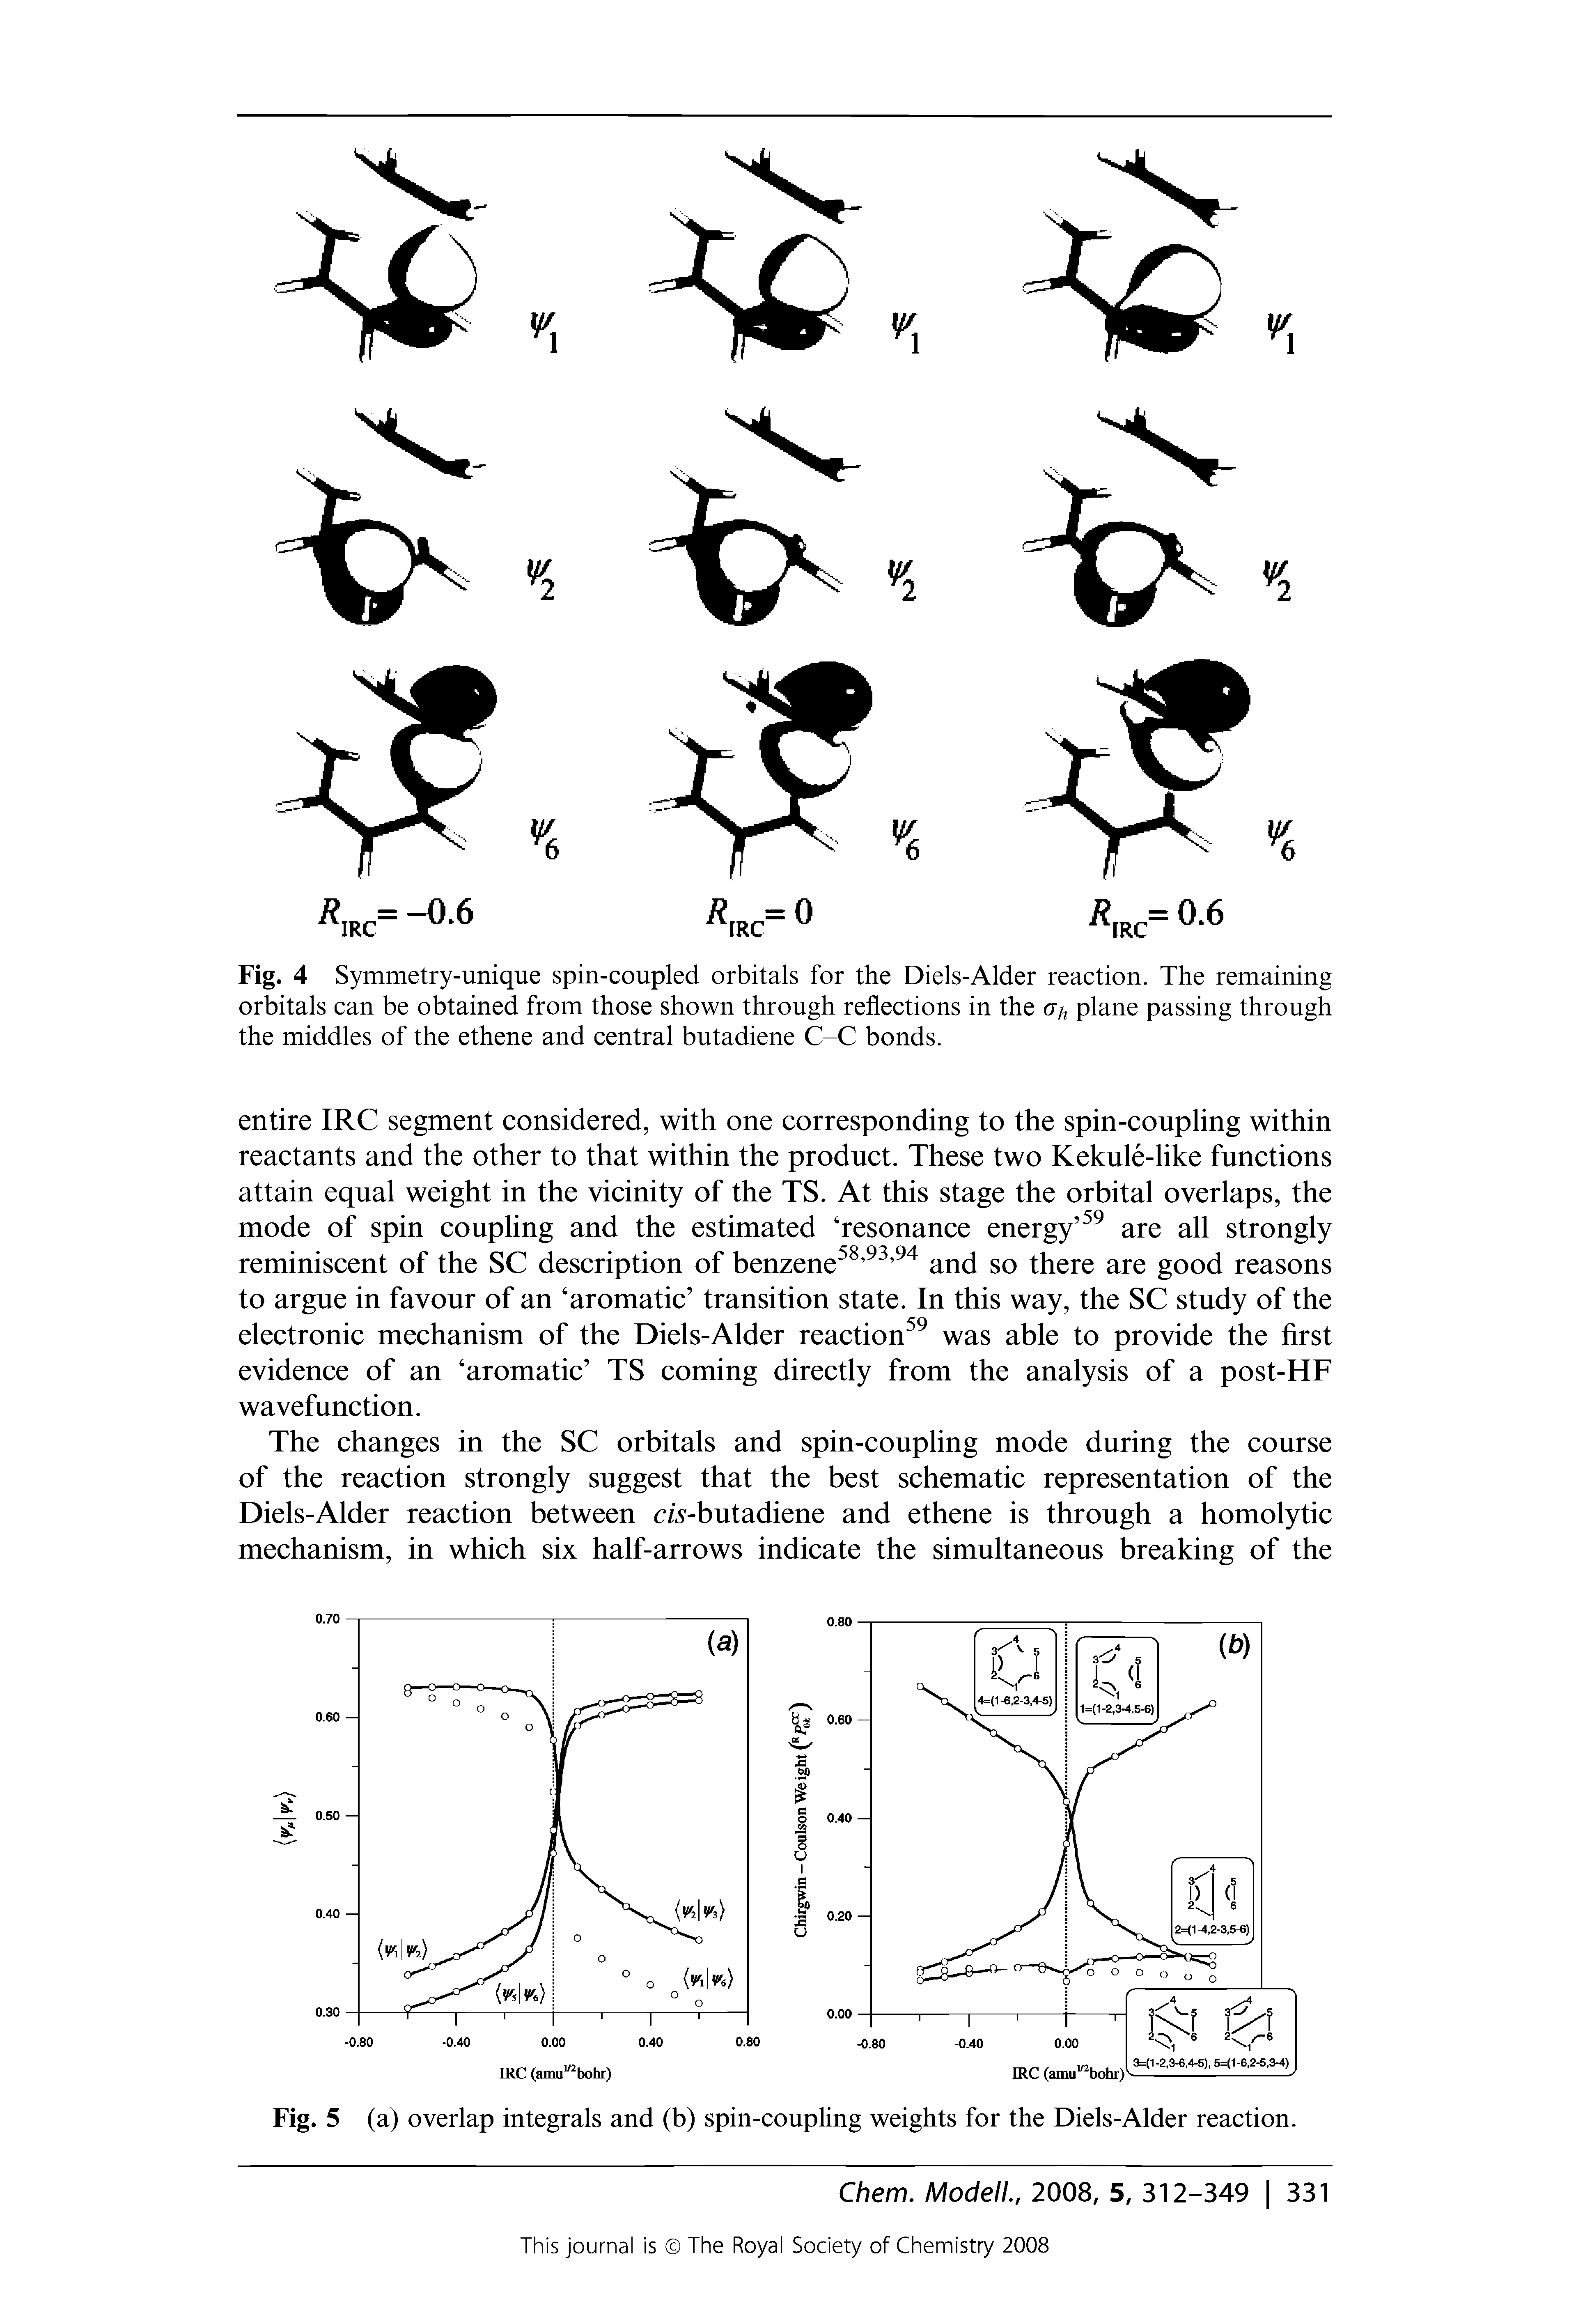 Fig. 4 Symmetry-unique spin-coupled orbitals for the Diels-Alder reaction. The remaining orbitals can be obtained from those shown through reflections in the Oh plane passing through the middles of the ethene and central butadiene C-C bonds.